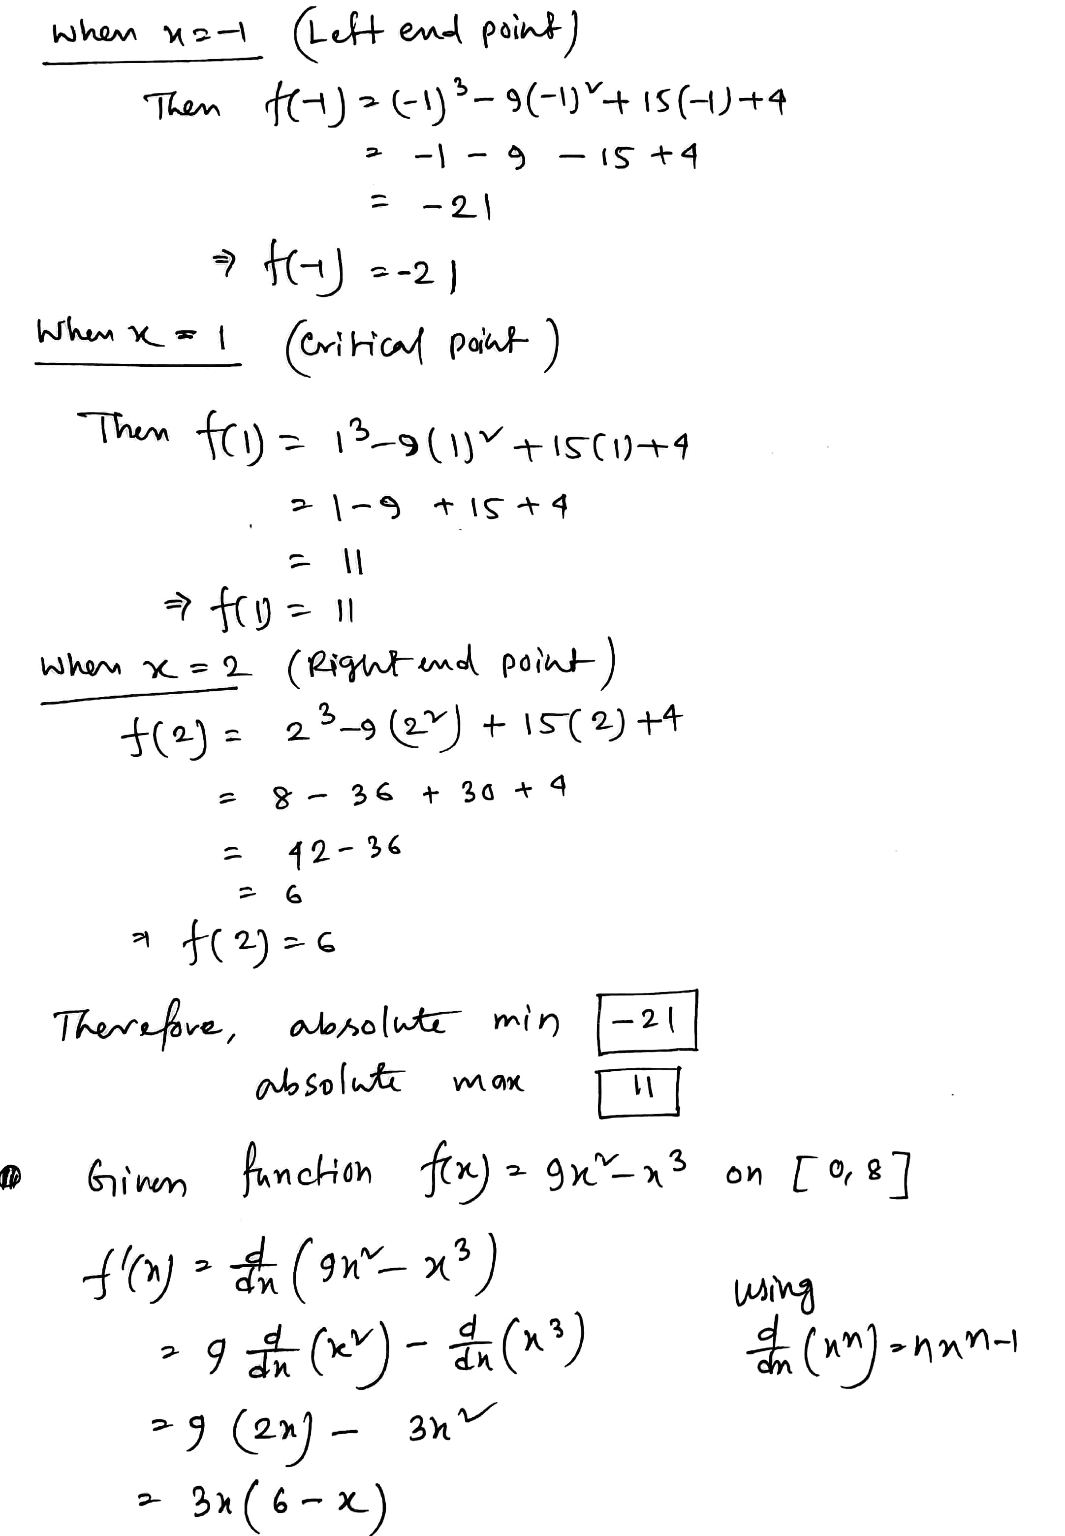 Find (without using a calculator) the absolute extreme values of the function on the given interval. f(x) = x3 - 9x2 + 15x + 4 on (-1,2] absolute min absolute max Need Help? Read Watch Talk to a Tutor 2. -/10 POINTS BERRAPCALC73.3.011. Find (without using a calculator) the absolute extreme values of the function on the given interval. f(x) = 9x2 - x3 on O, 8] absolute min absolute max Need Help? Read It Watch It Talk to a Tutor